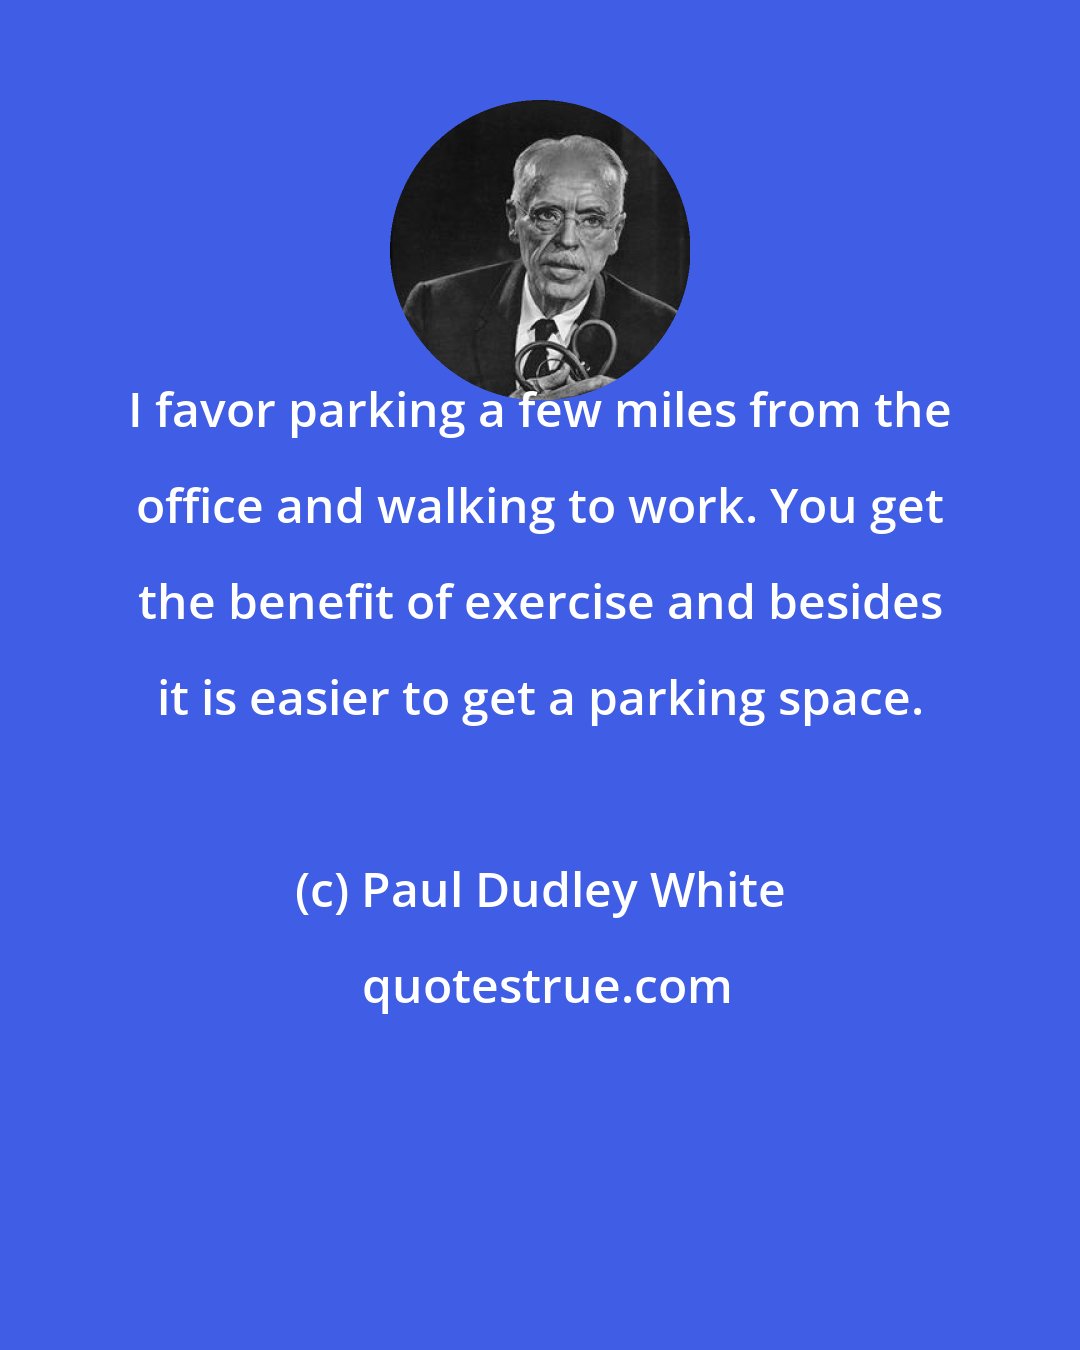 Paul Dudley White: I favor parking a few miles from the office and walking to work. You get the benefit of exercise and besides it is easier to get a parking space.